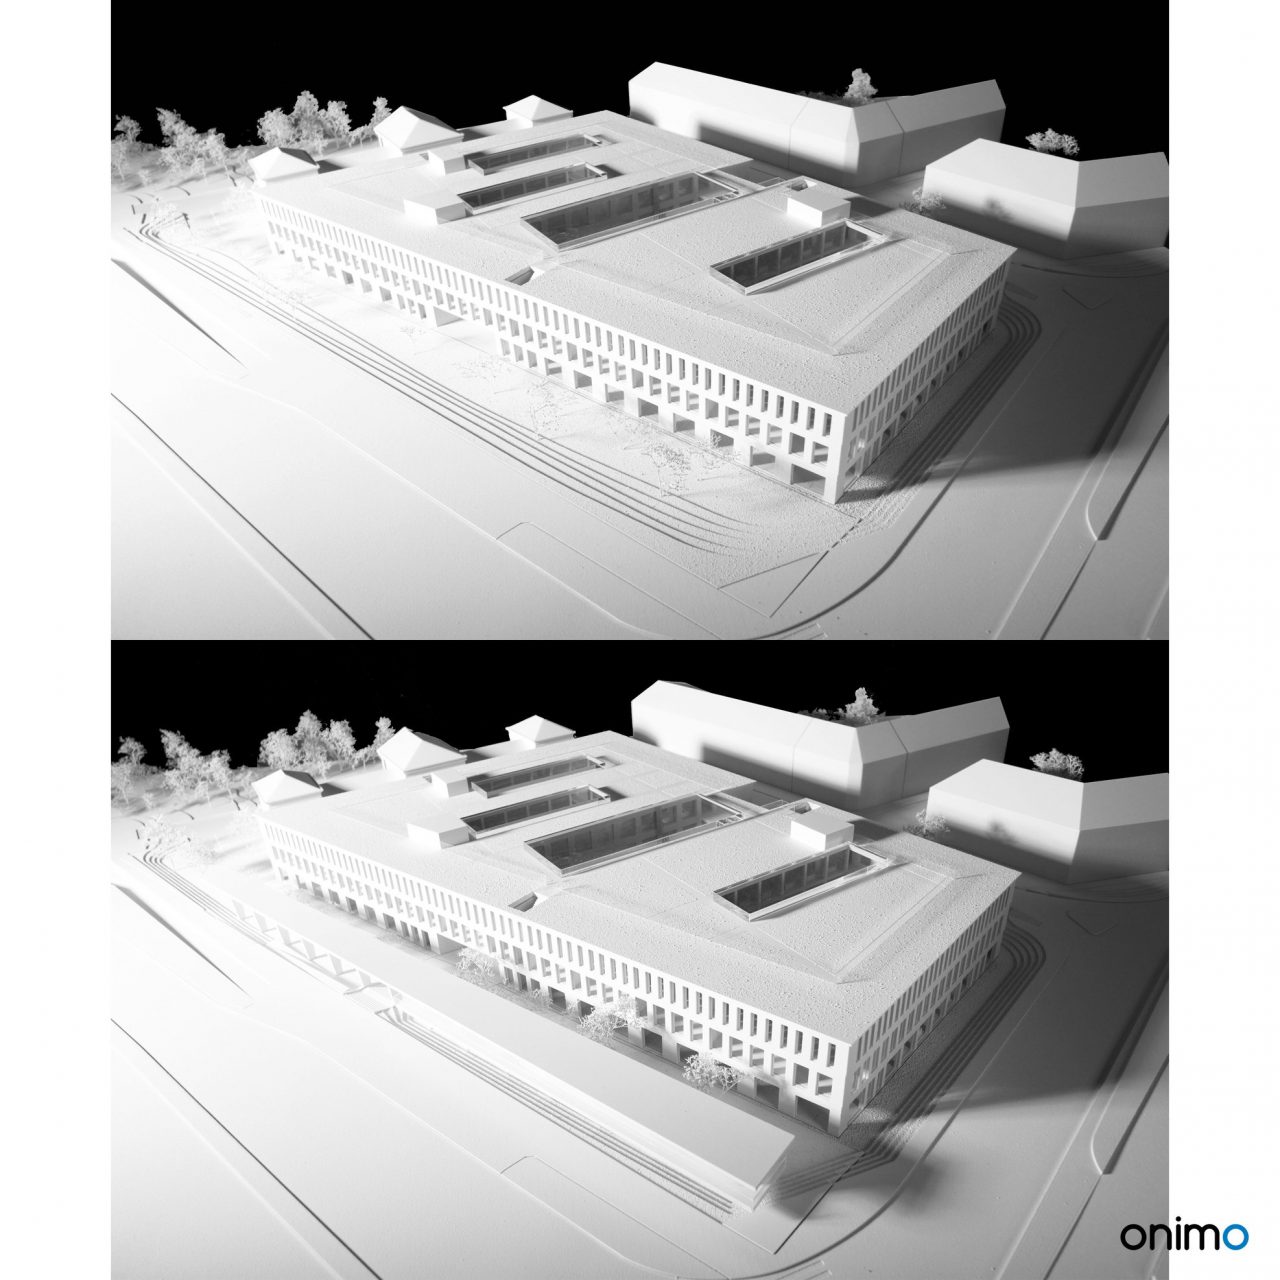 Didactic building of the University of Warsaw | WXCA, onimo, best architectural models, best building models